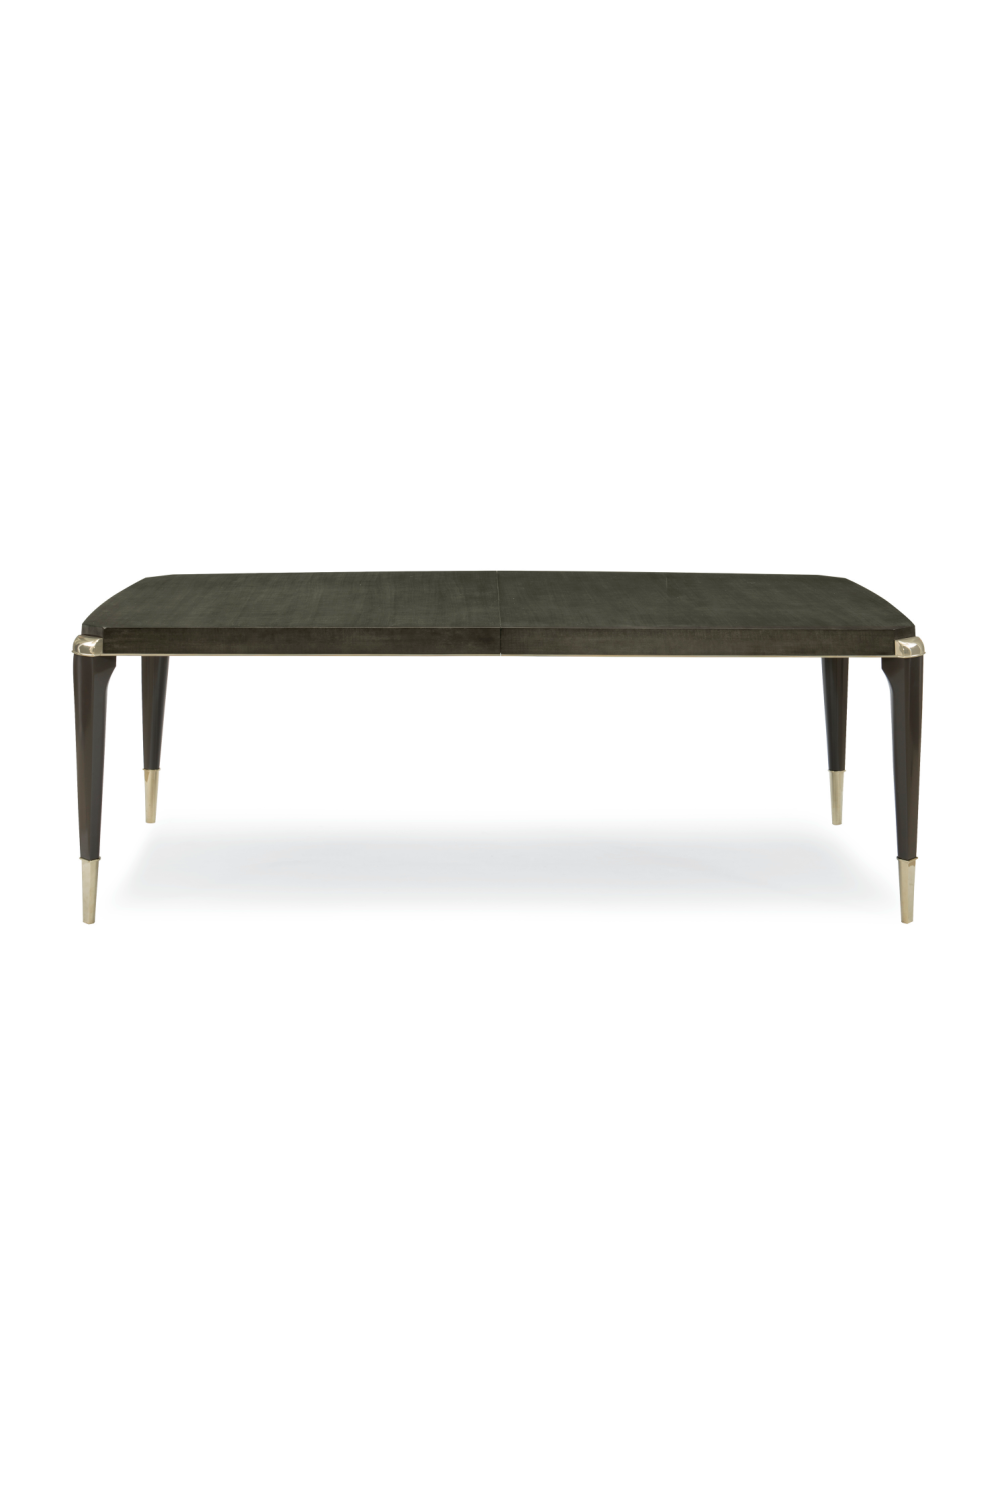 Black Modern Dining Table | Caracole All Trimmed Out | Oroa.com